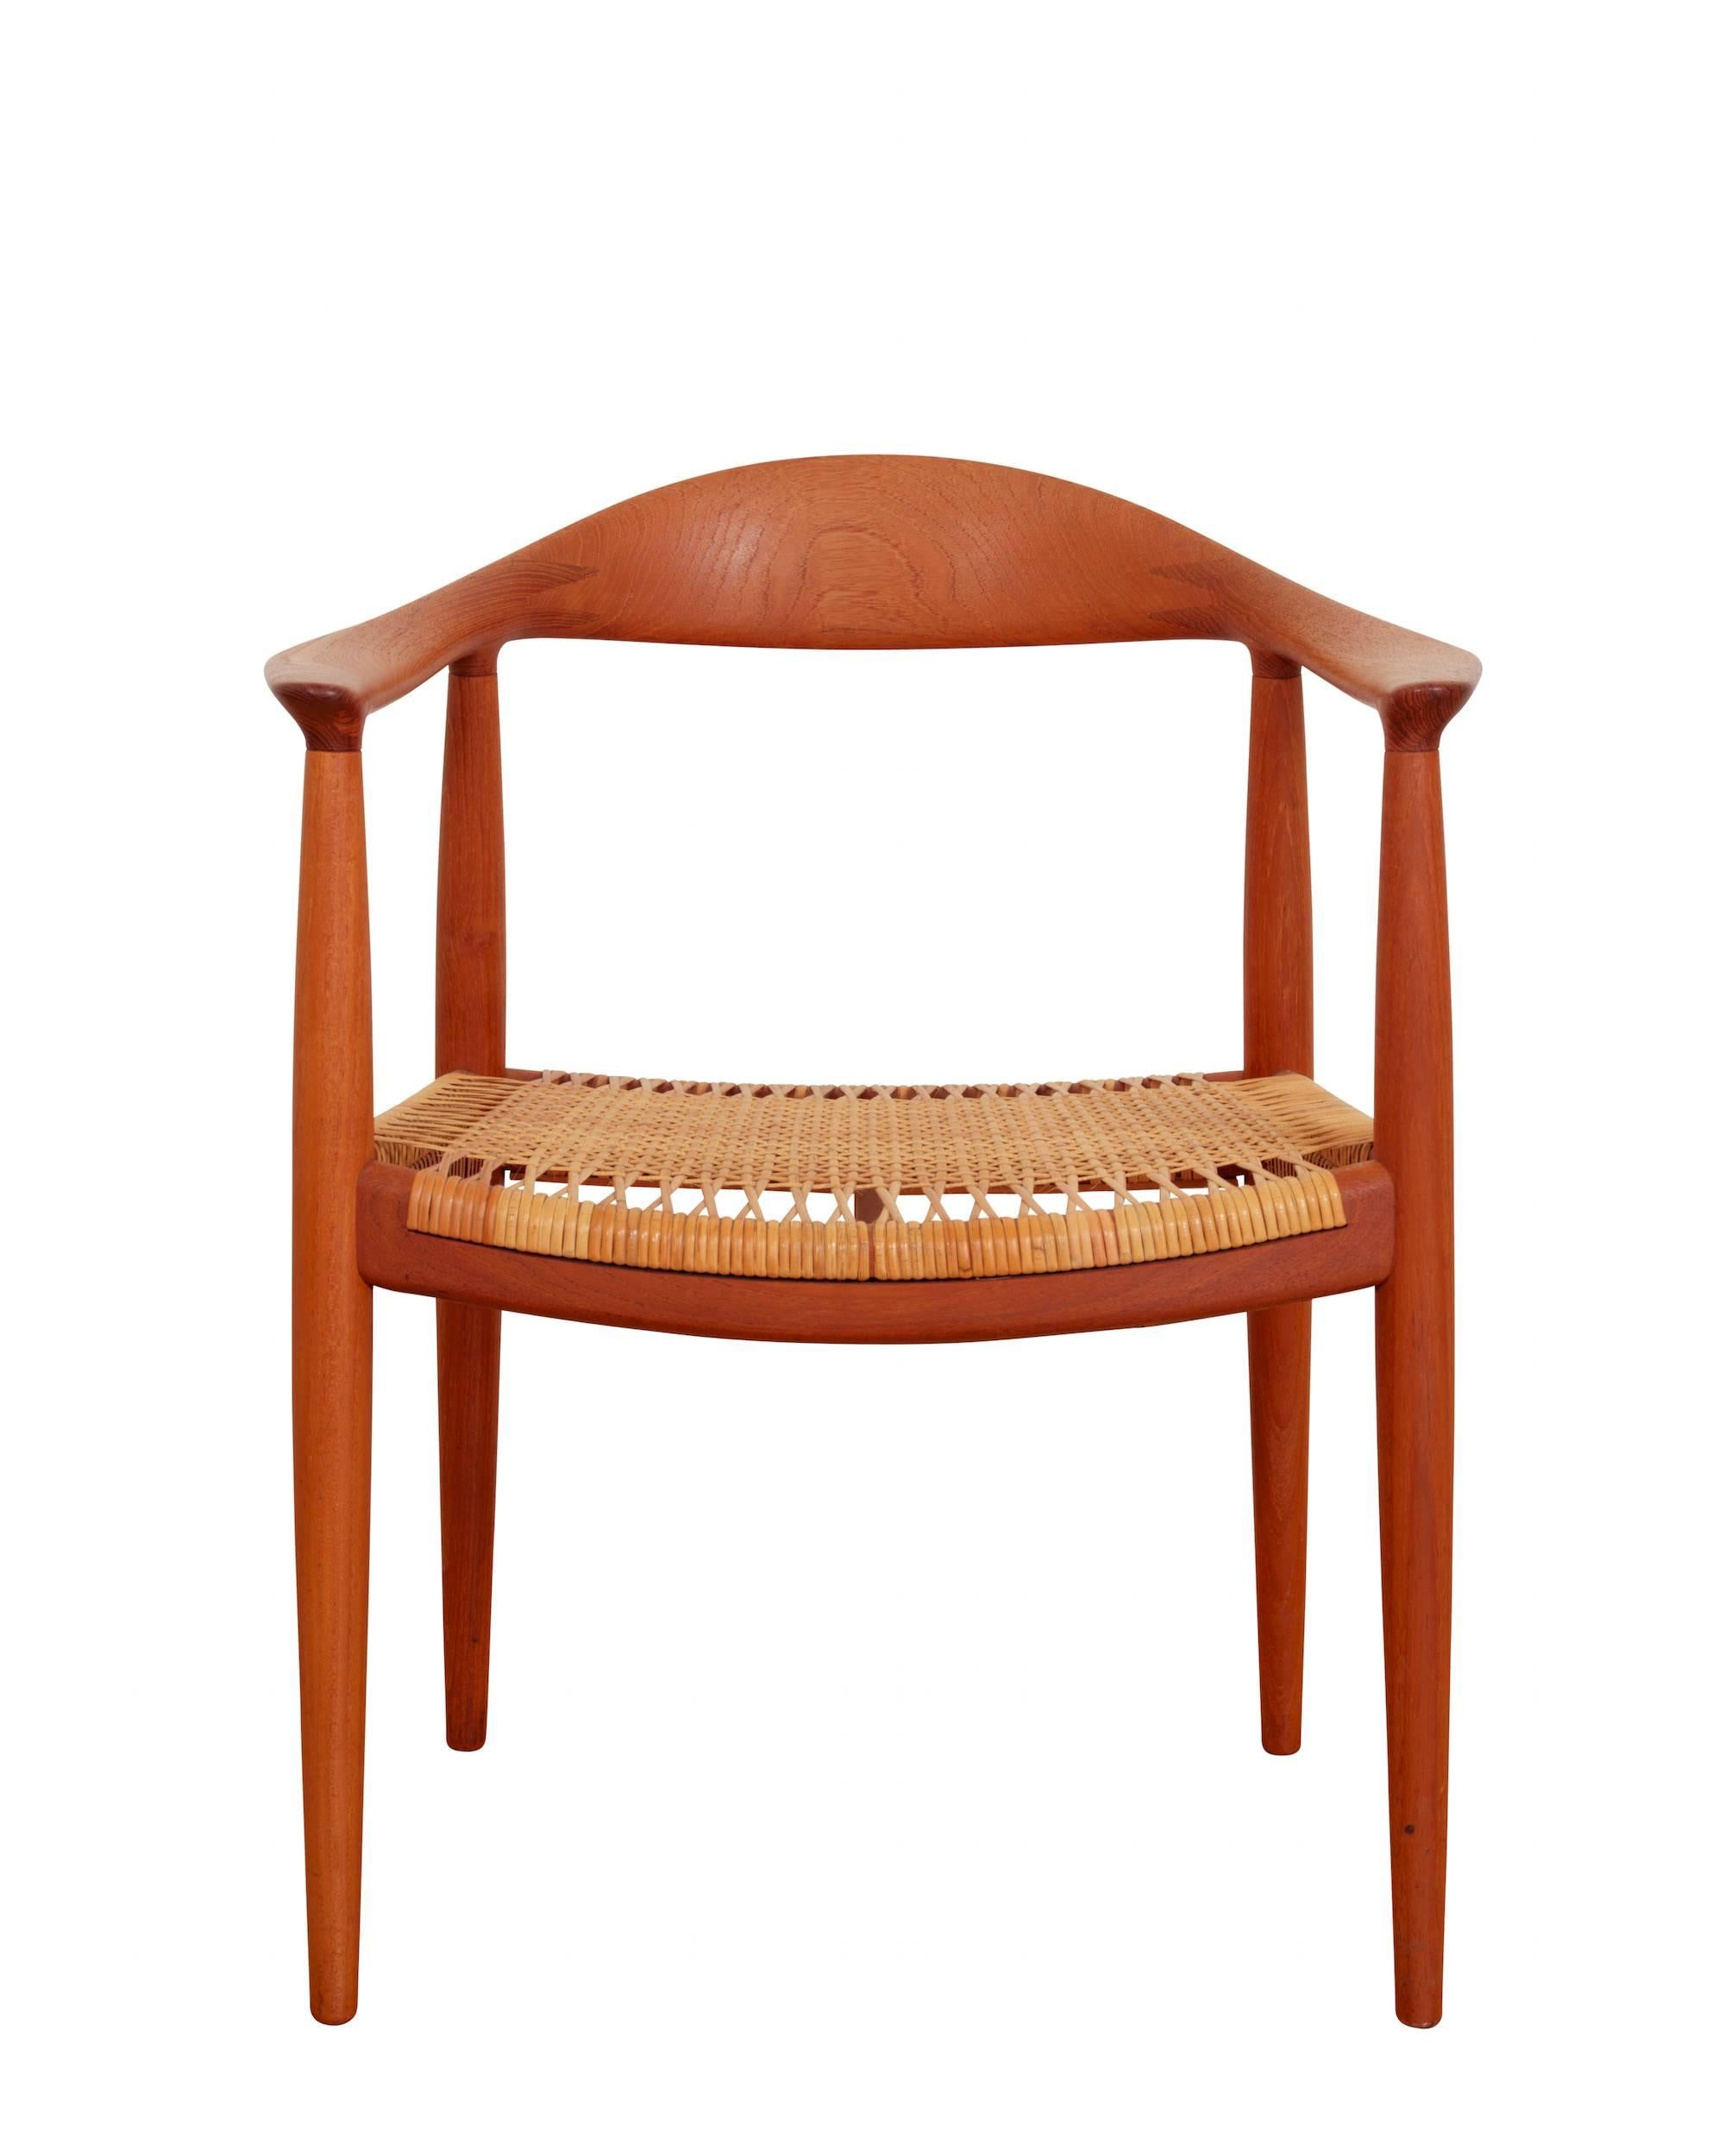 Teak chair with woven cane seat. Manufactured by Johannes Hansen.